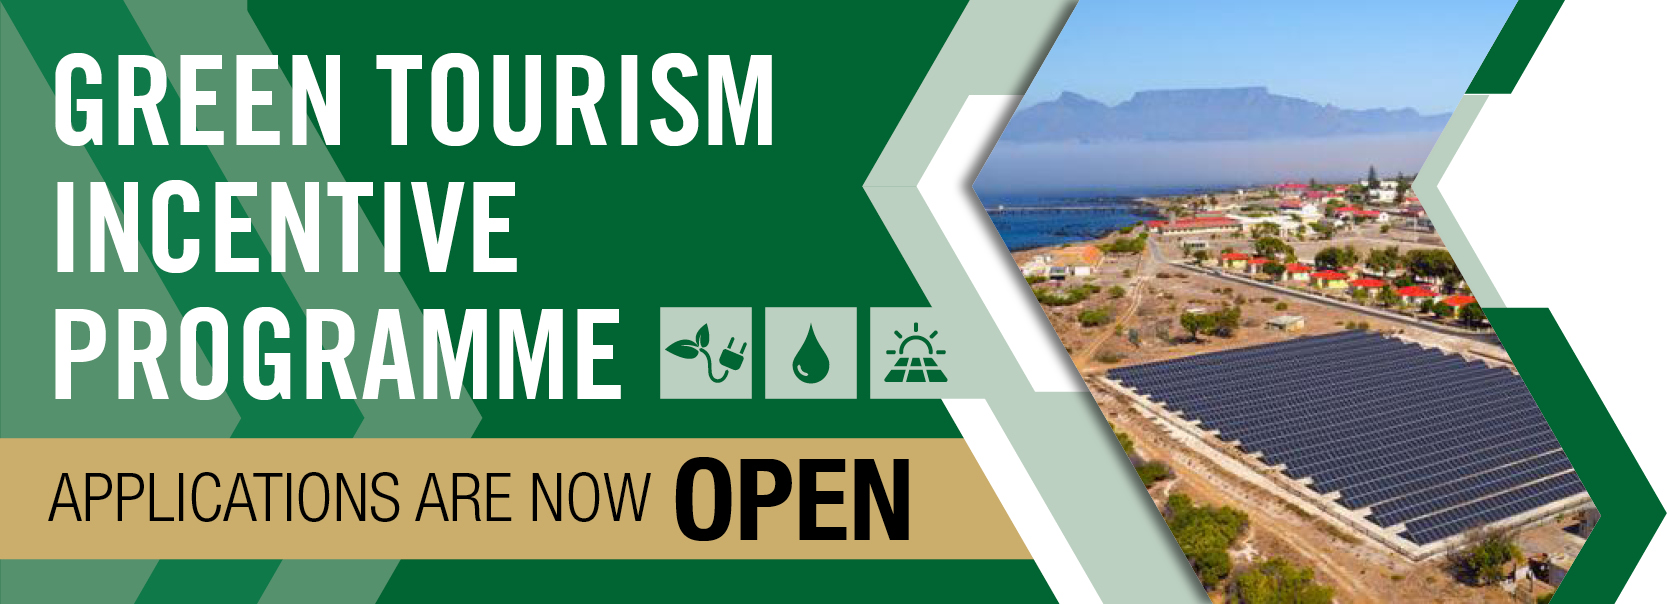 New application window for Green Tourism Programme opens